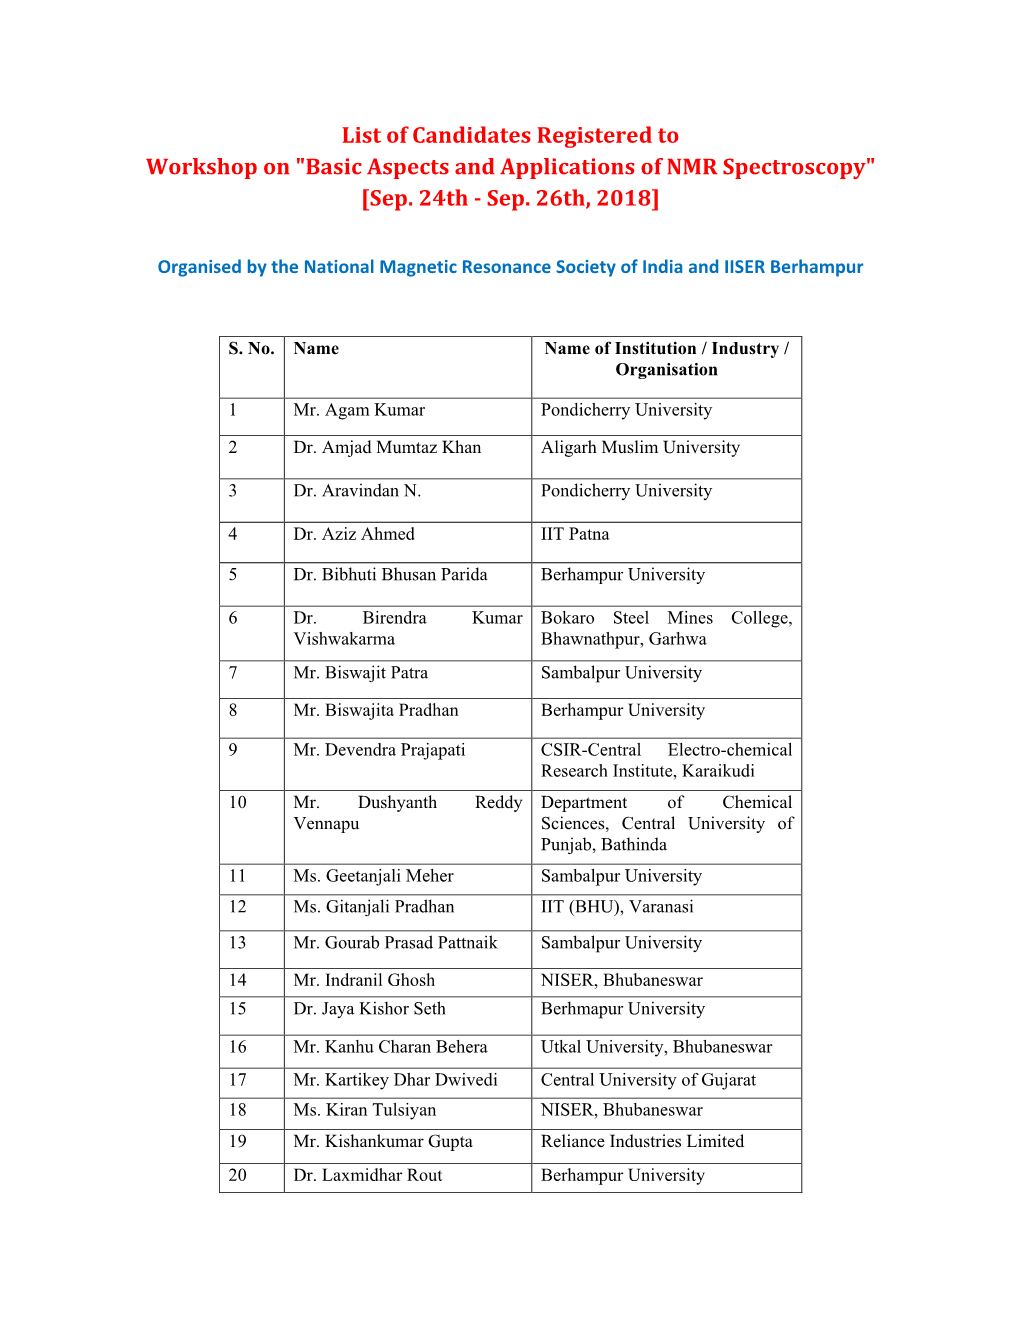 List of Candidates Registered to Workshop on "Basic Aspects and Applications of NMR Spectroscopy" [Sep